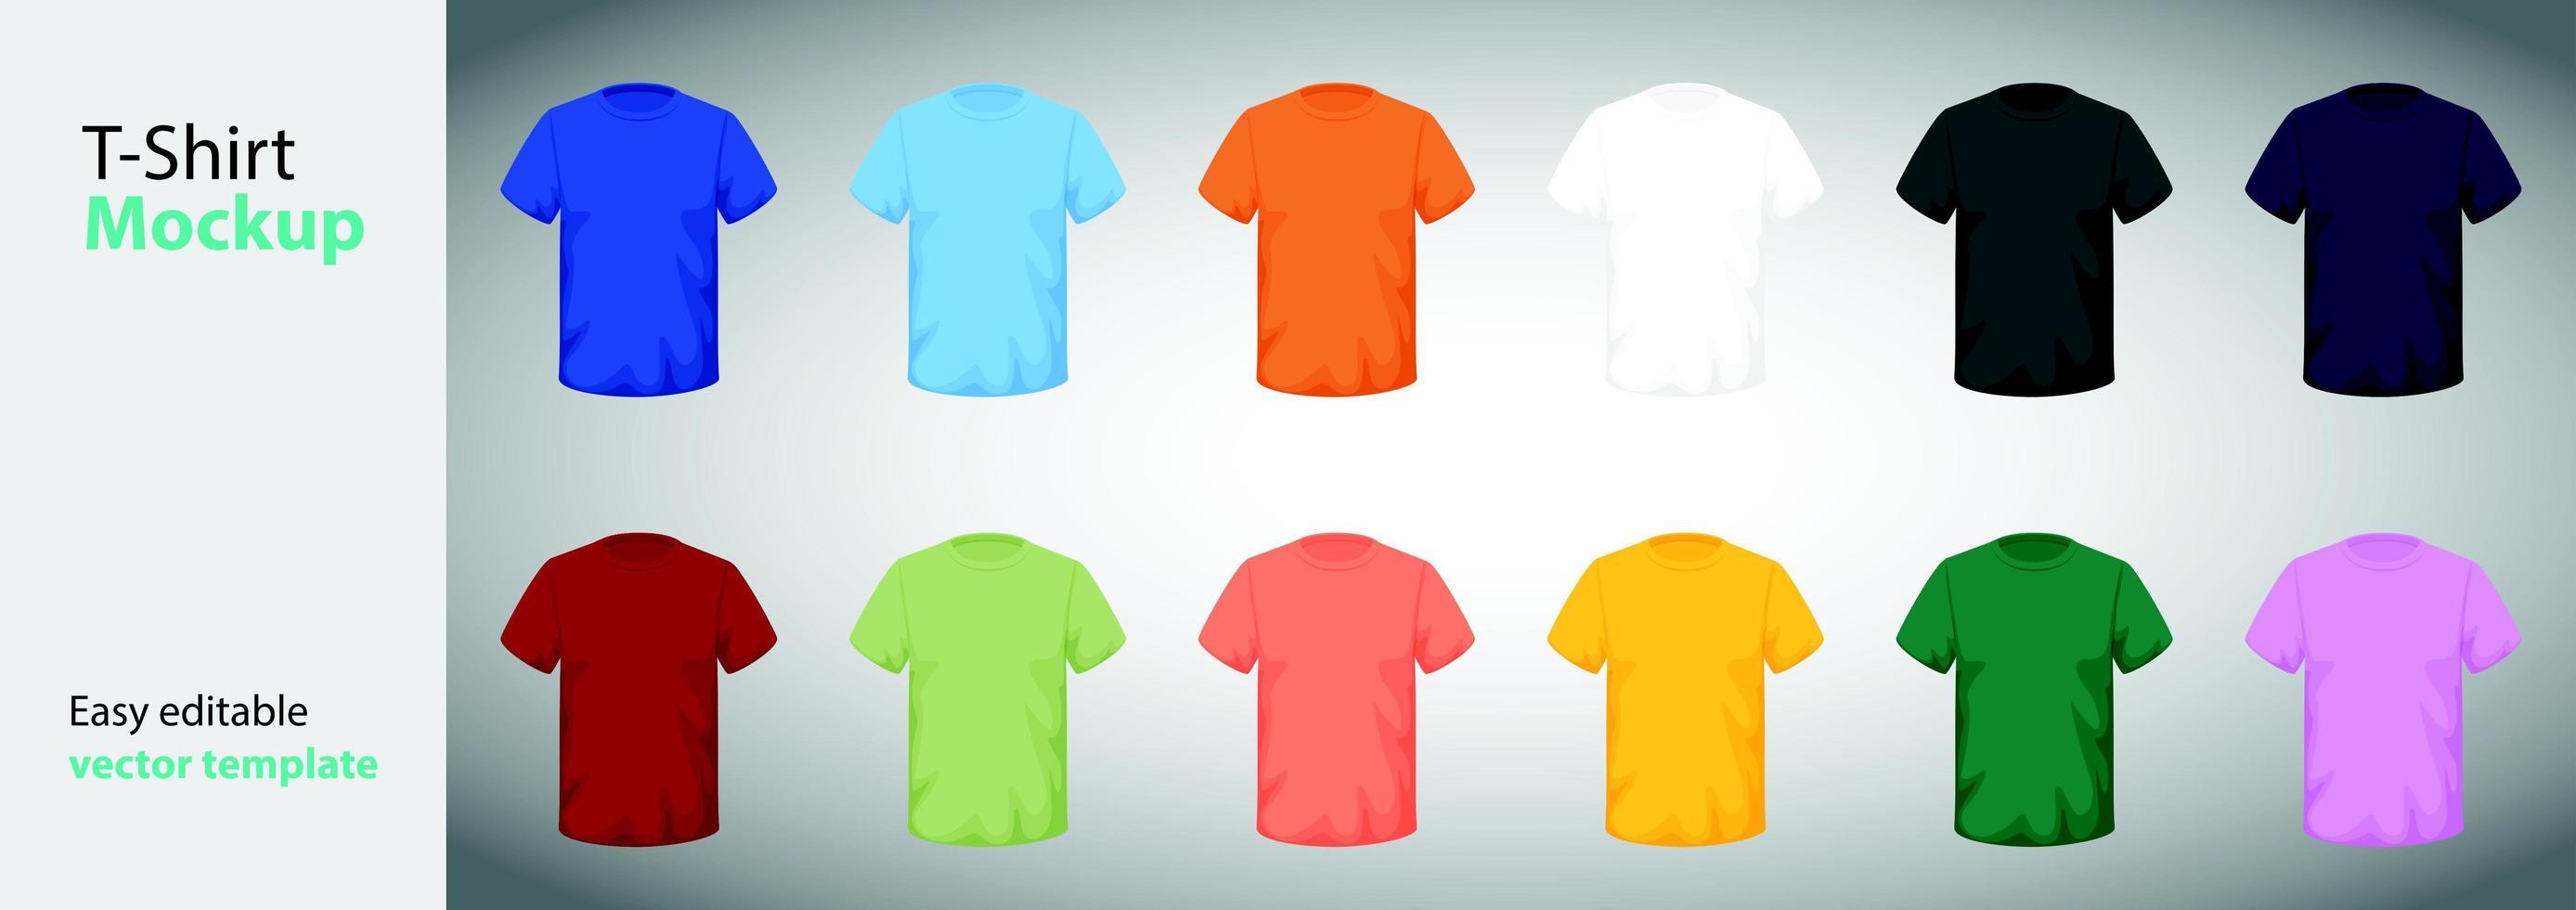 T-shirt templates of different sizes and colors vector